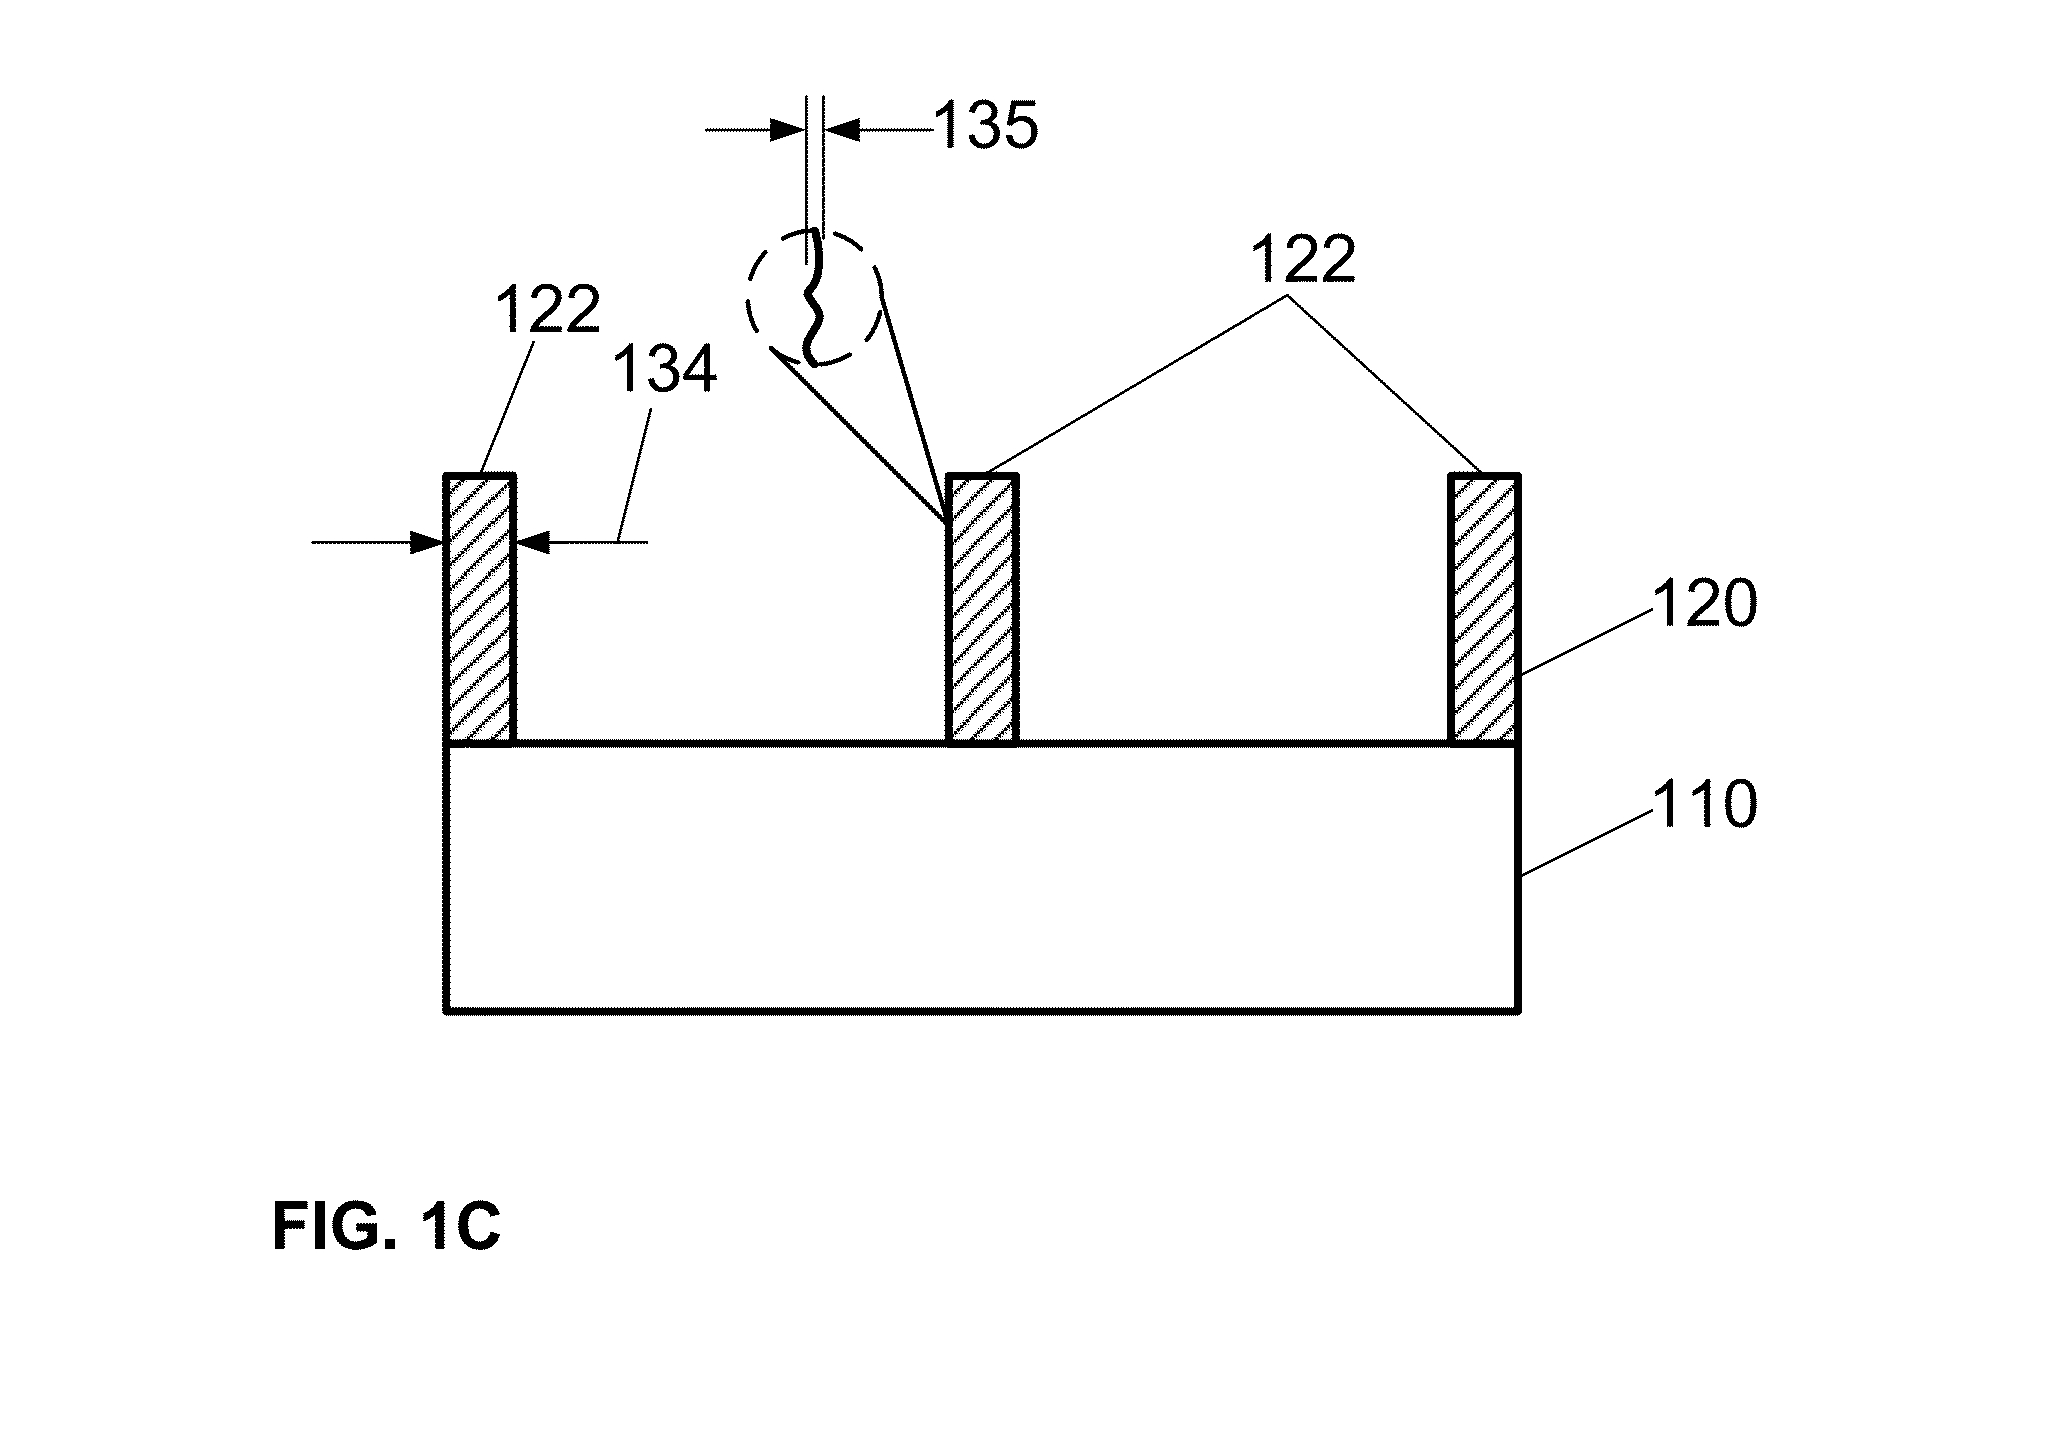 Vapor treatment process for pattern smoothing and inline critical dimension slimming